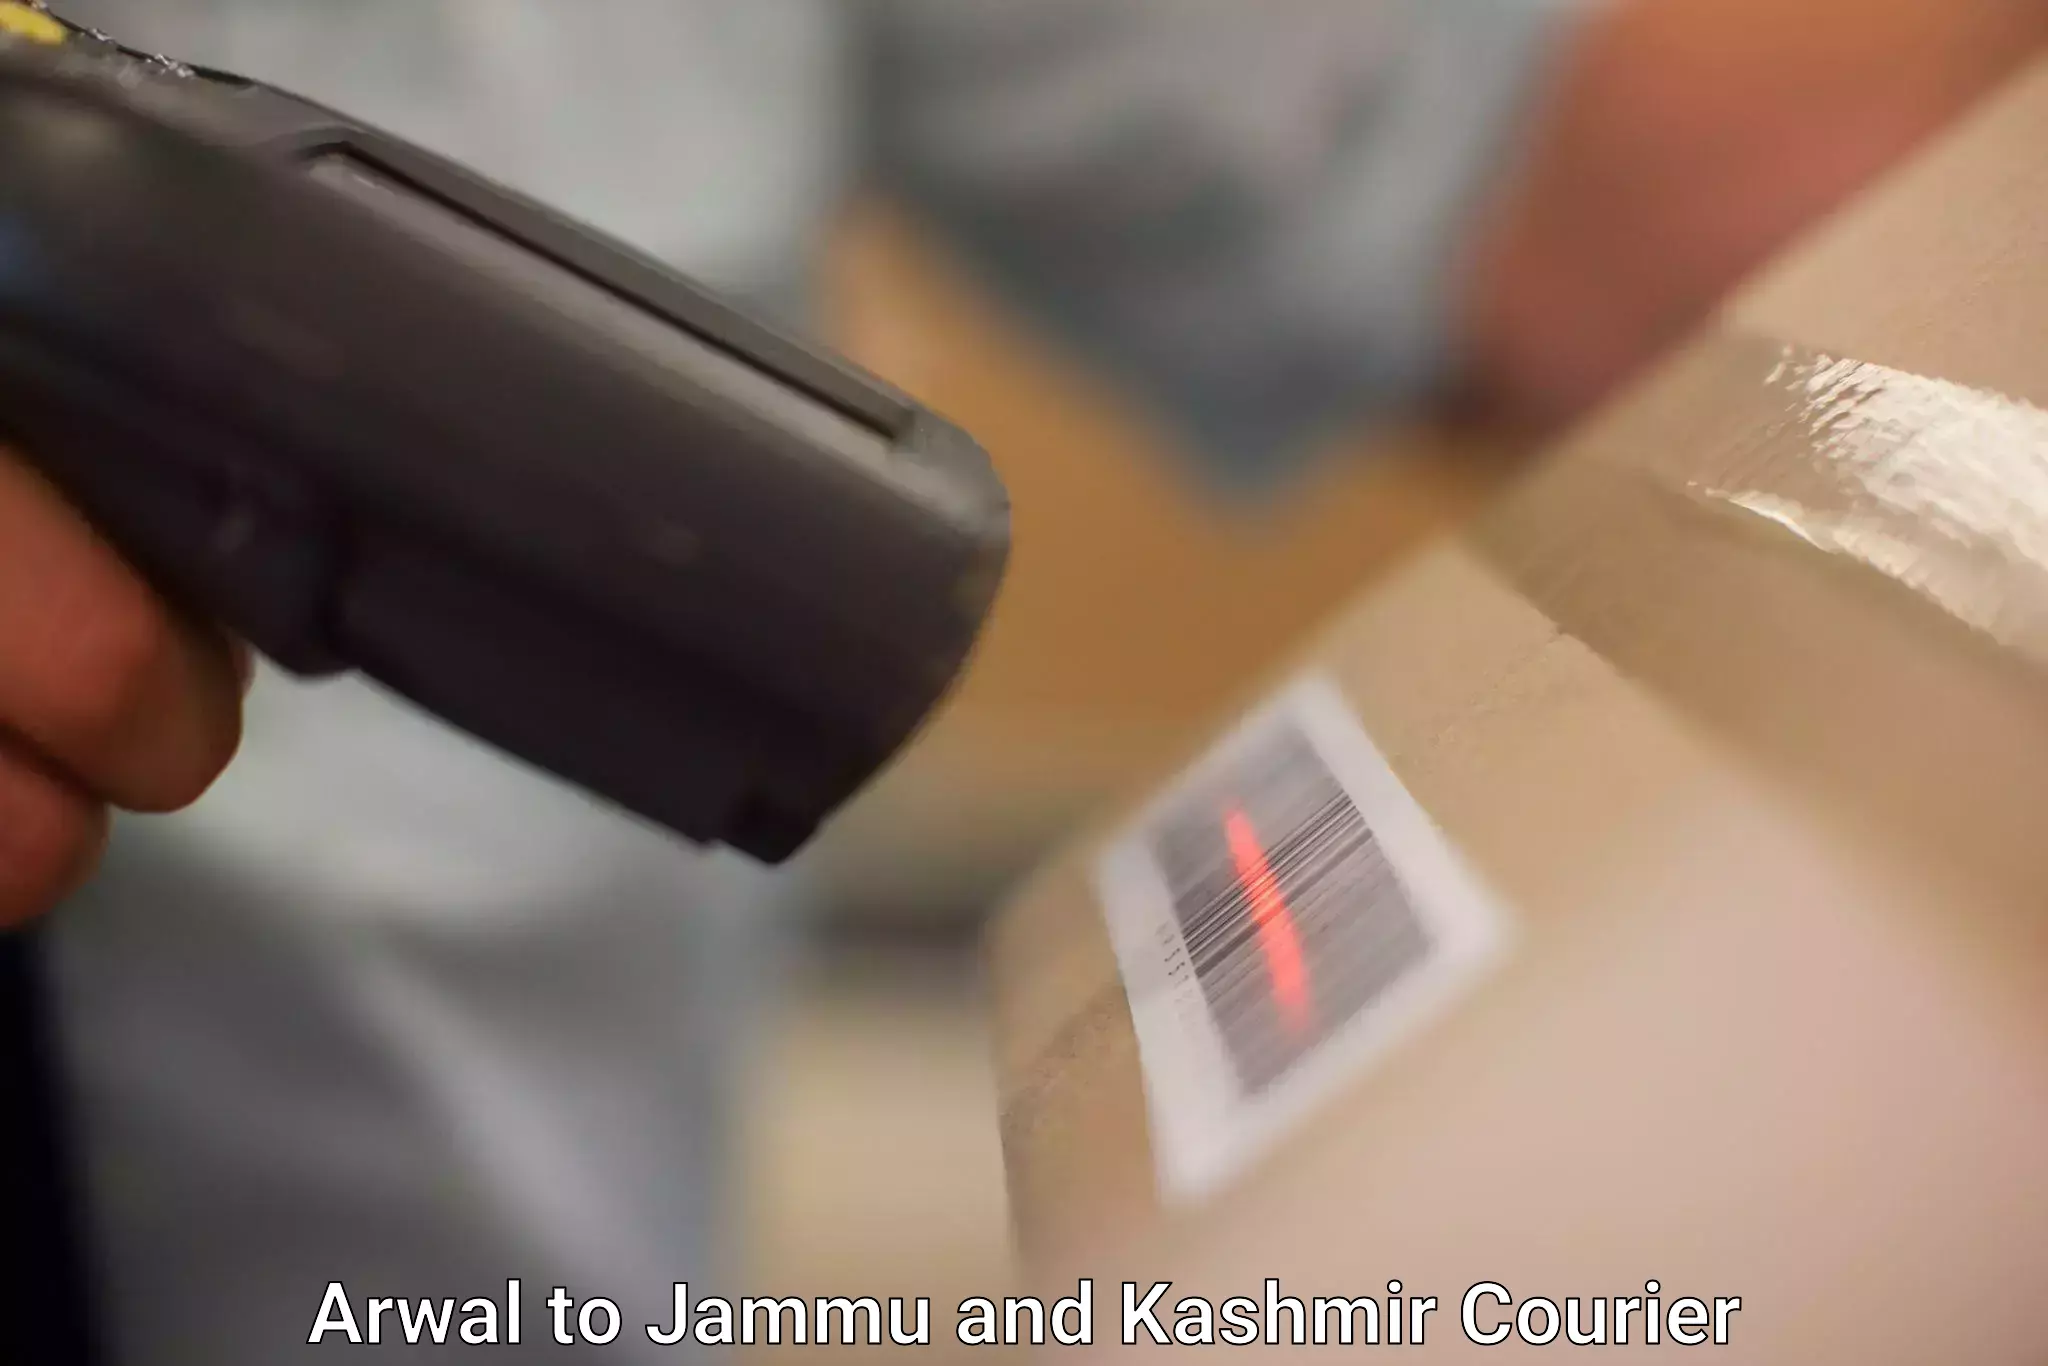 On-call courier service Arwal to Jammu and Kashmir